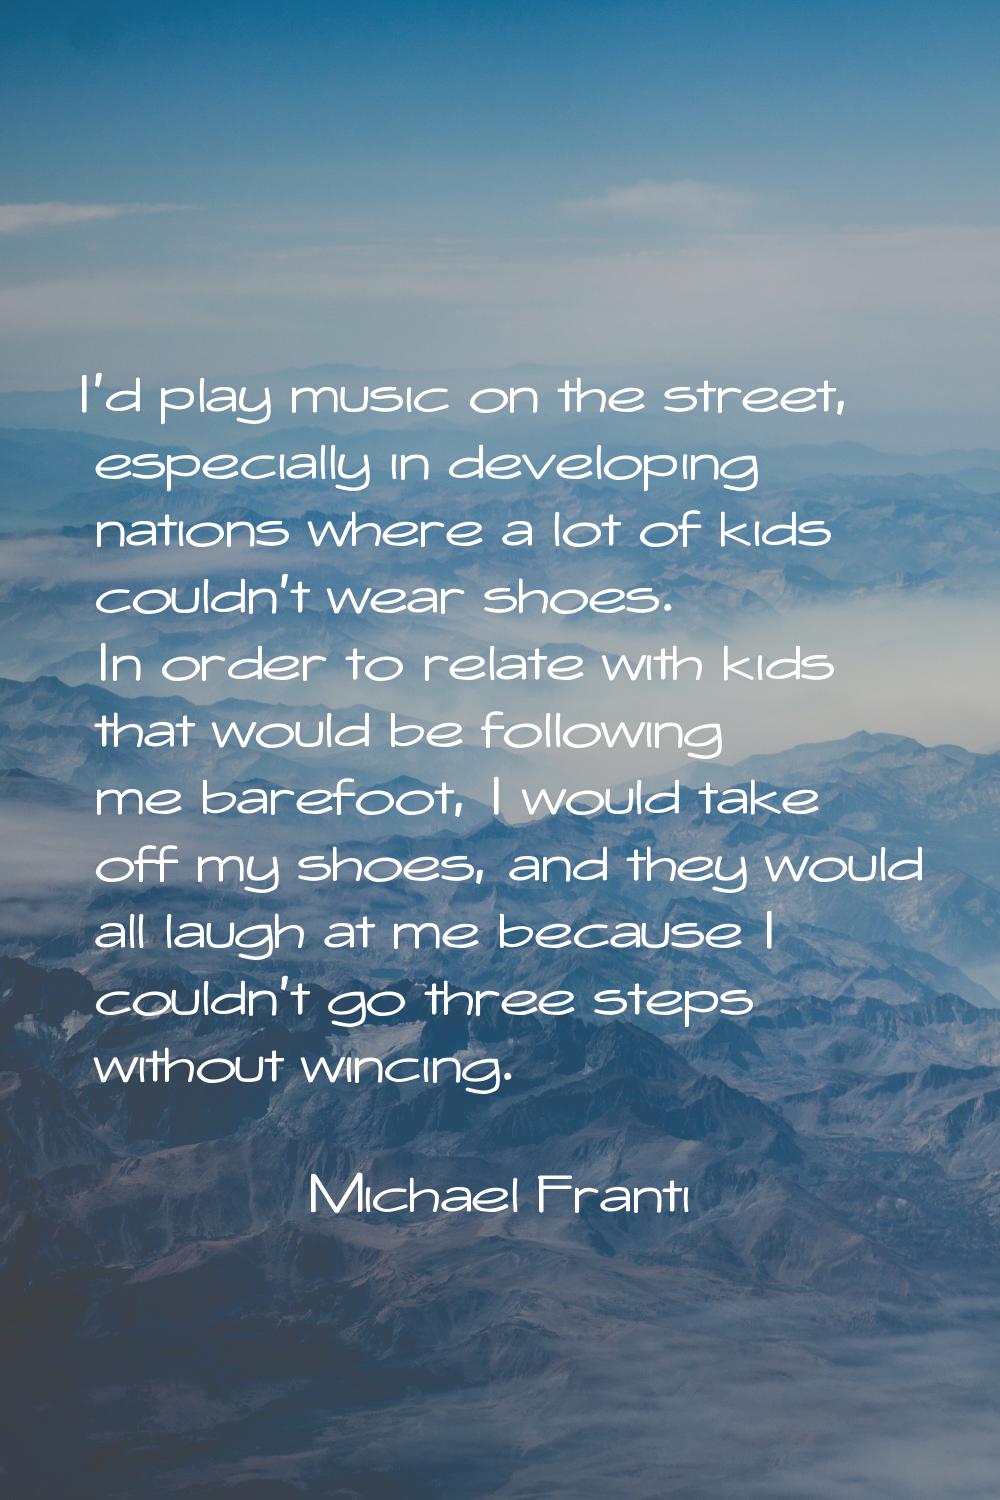 I'd play music on the street, especially in developing nations where a lot of kids couldn't wear sh